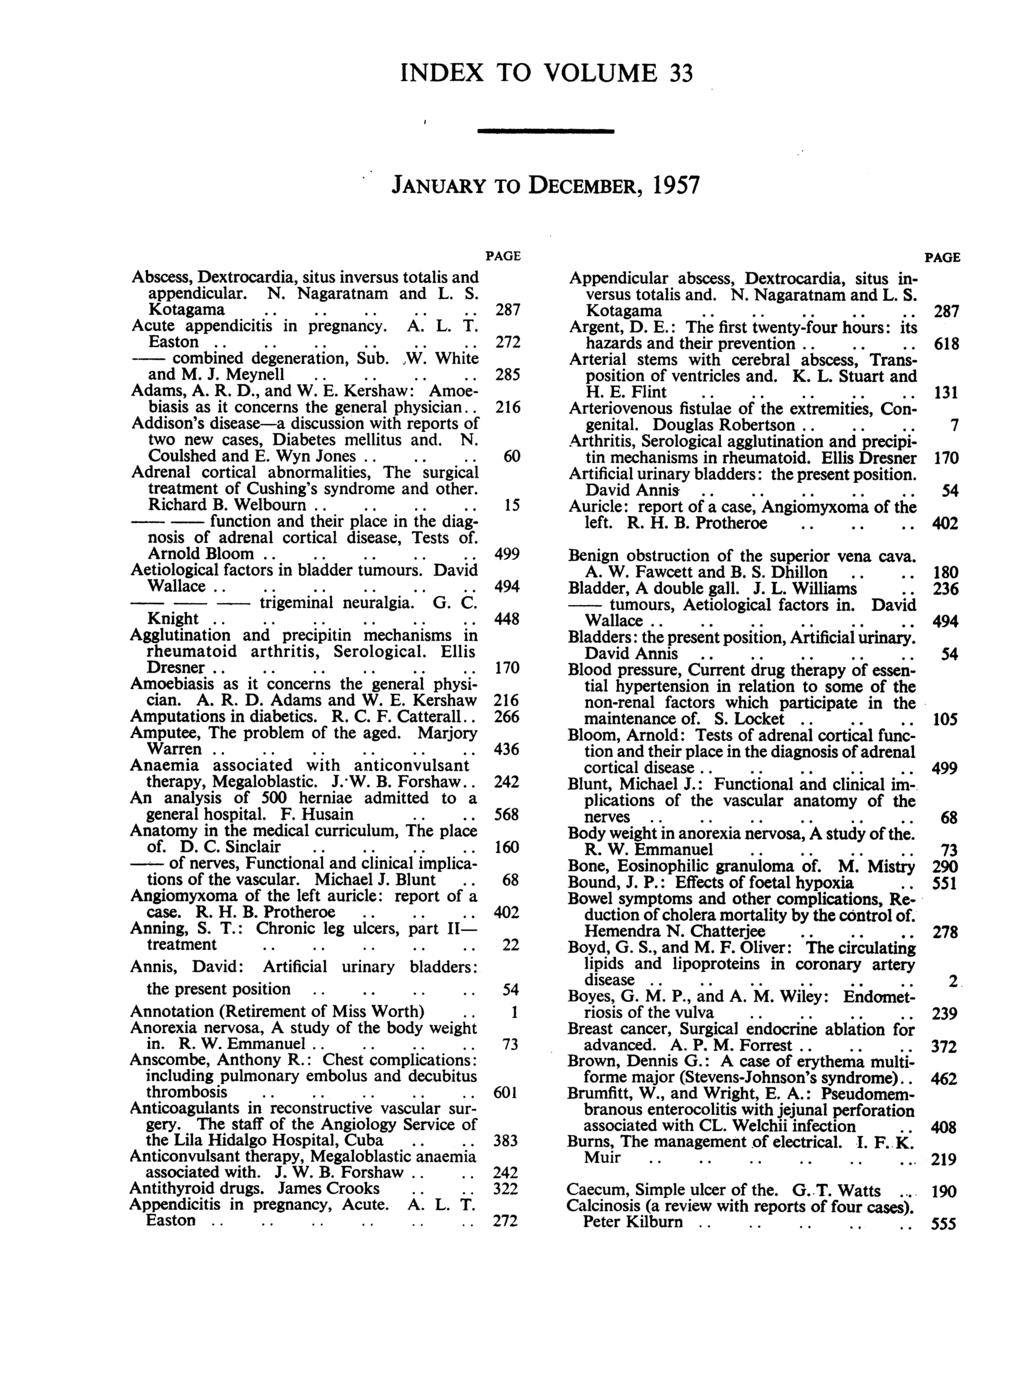 INDEX TO VOLUME 33 JANUARY TO DECEMBER, 1957 Abscess, Dextrocardia, situs inversus totalis and appendicular. N. Nagaratnam and L. S. Kotagama... Acute appendicitis in pregnancy. A. L. T. Easton.